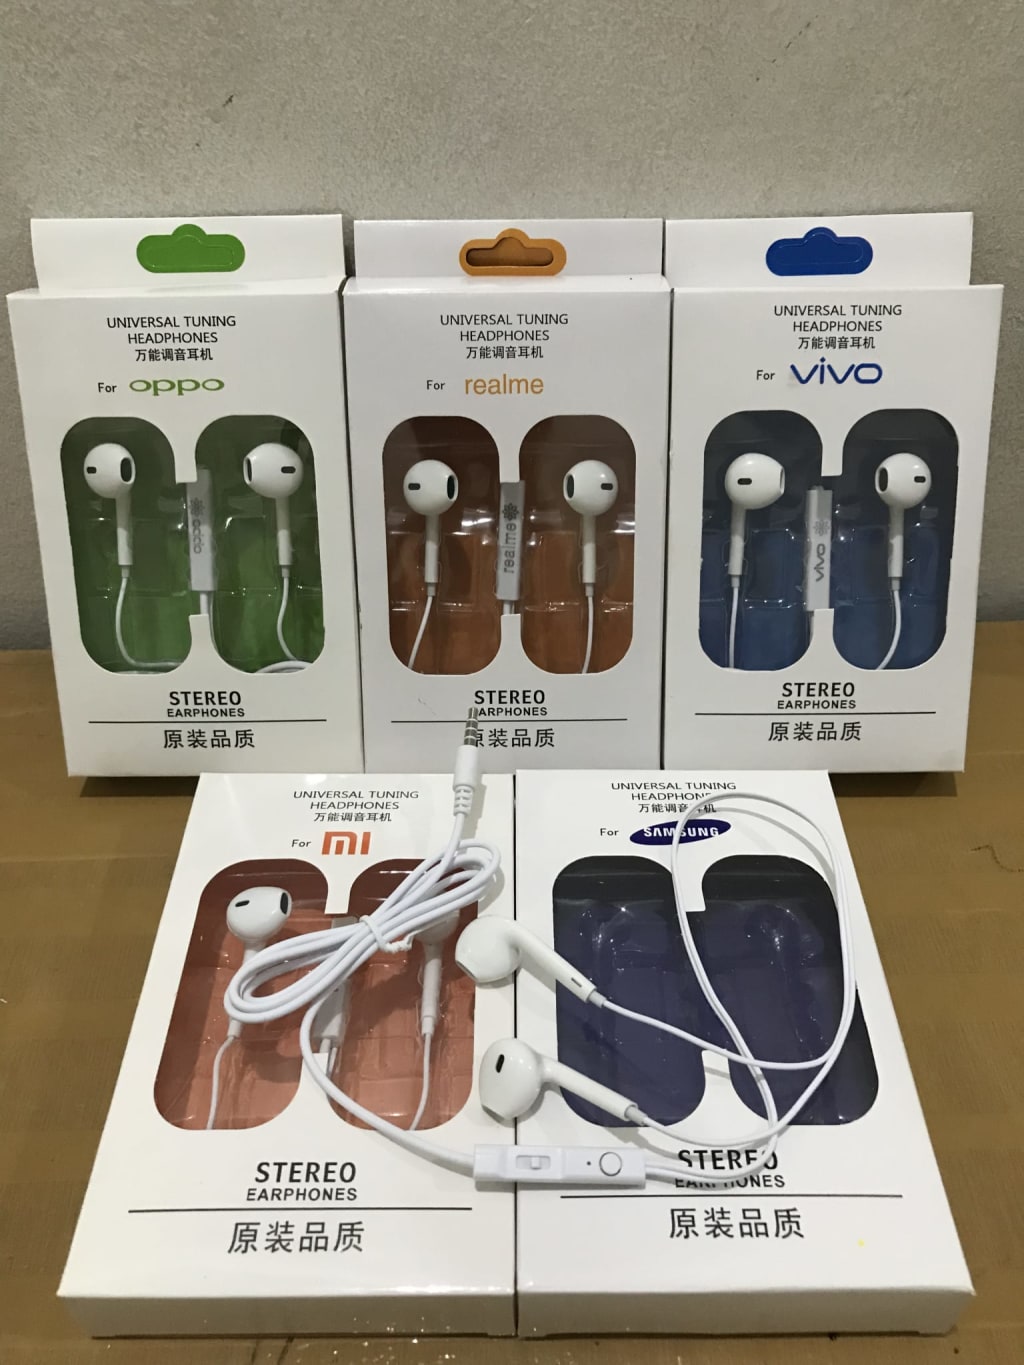 HEADSET STEREO BRANDED + (VOLUME + -) FOR SAMSUNG / OPPO / REALME / VIVO / XIAOMI + PACKING IMPOR di qeong.com